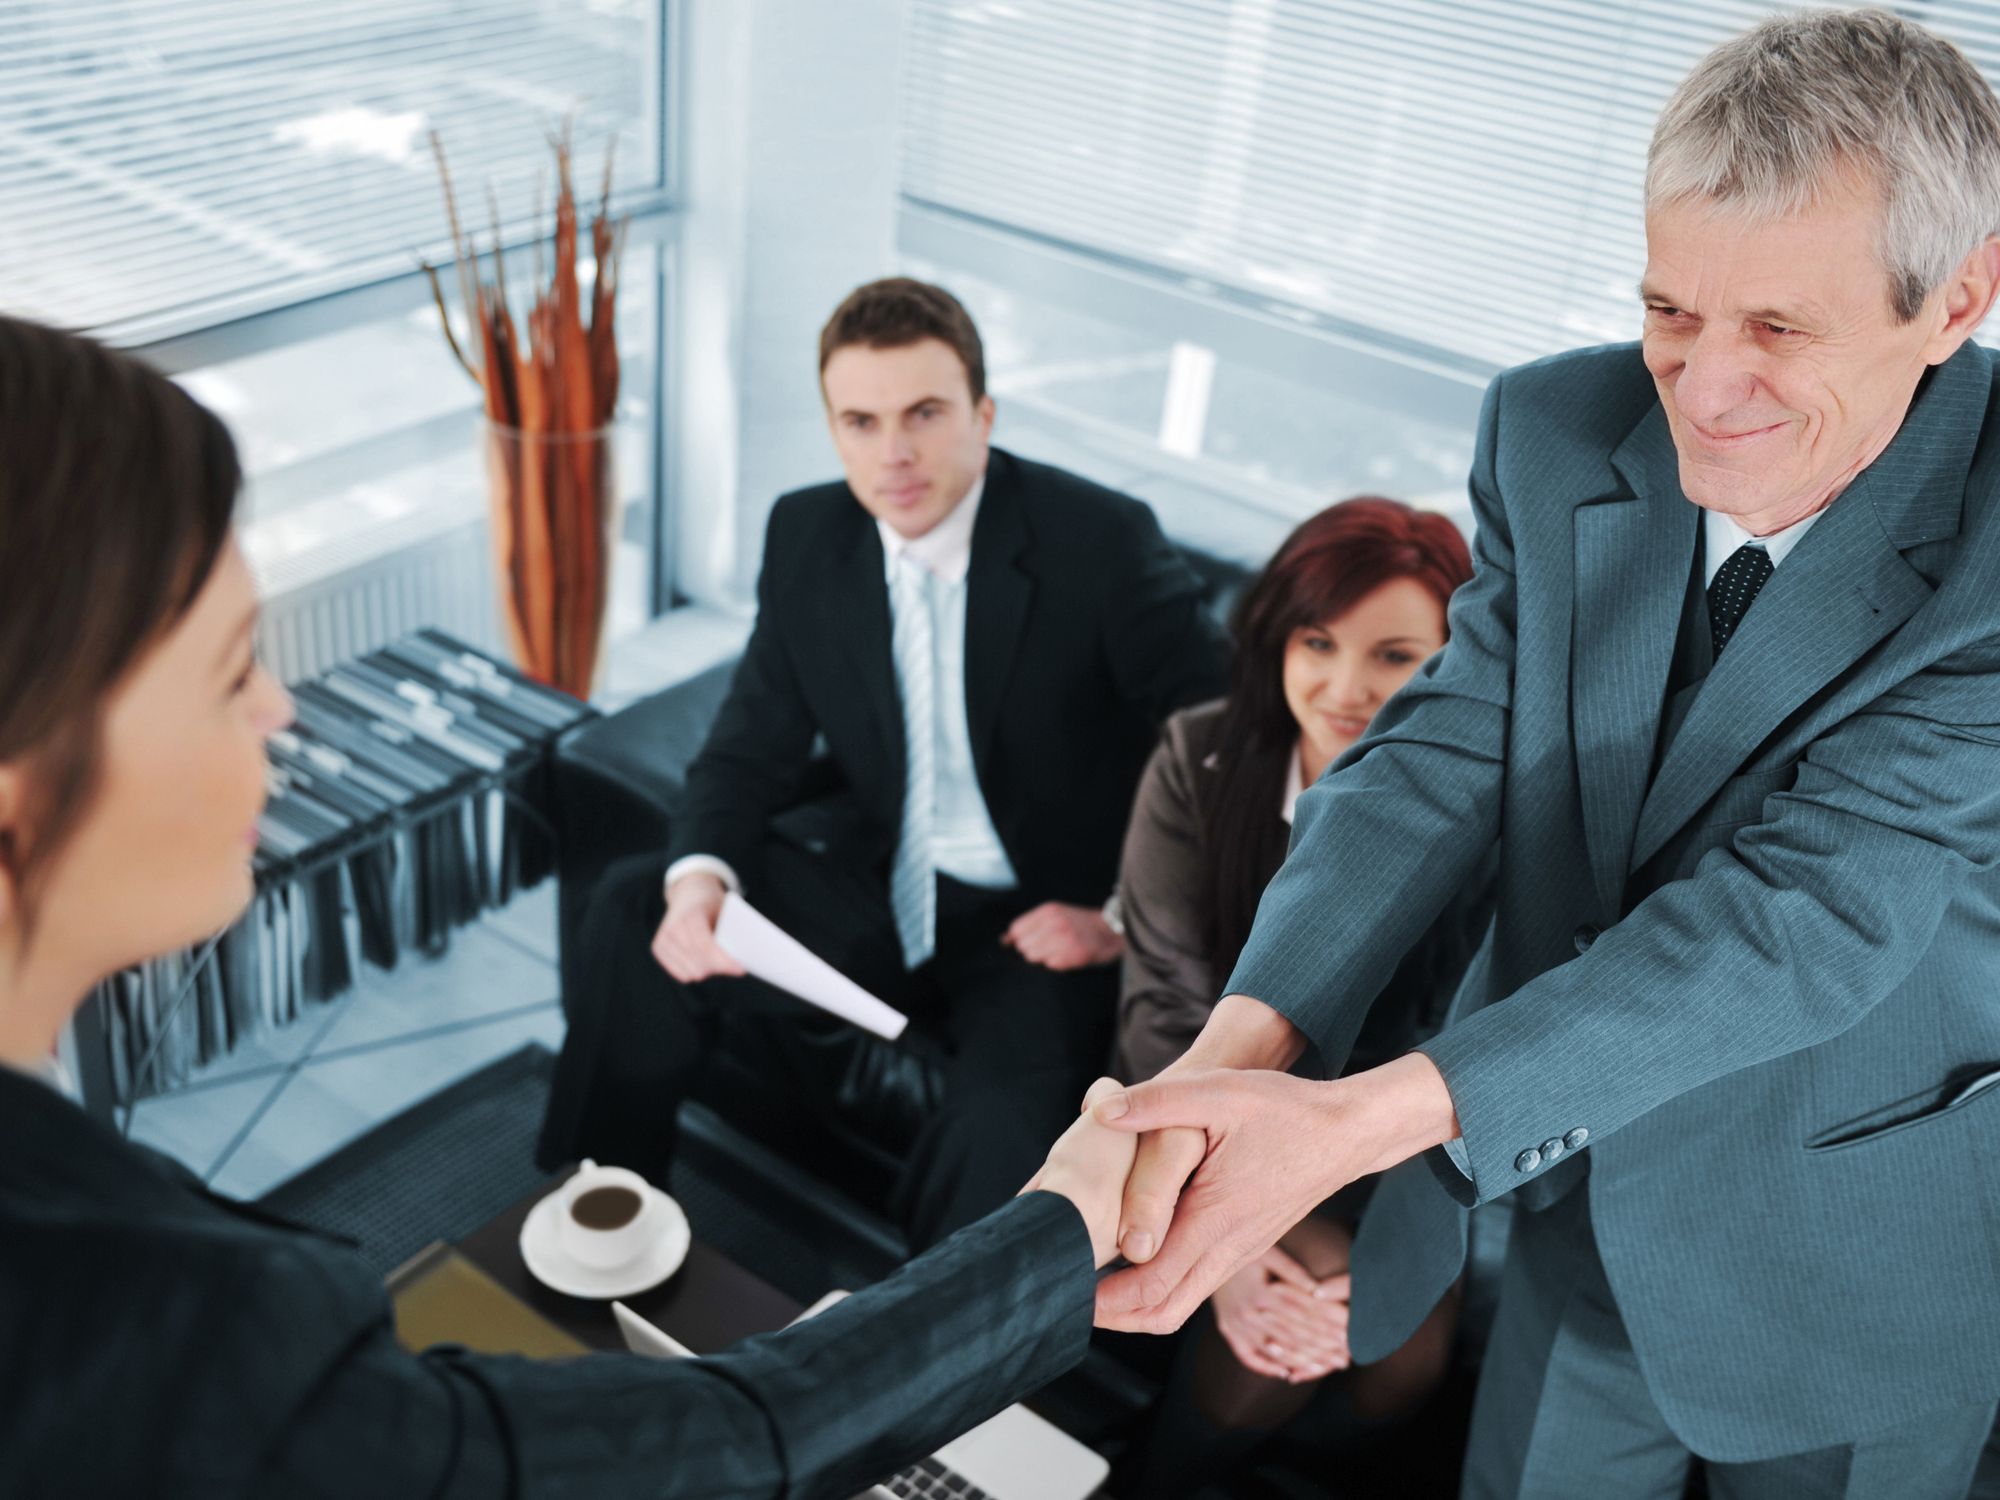 Human resources shakes hands with job prospect during interview.